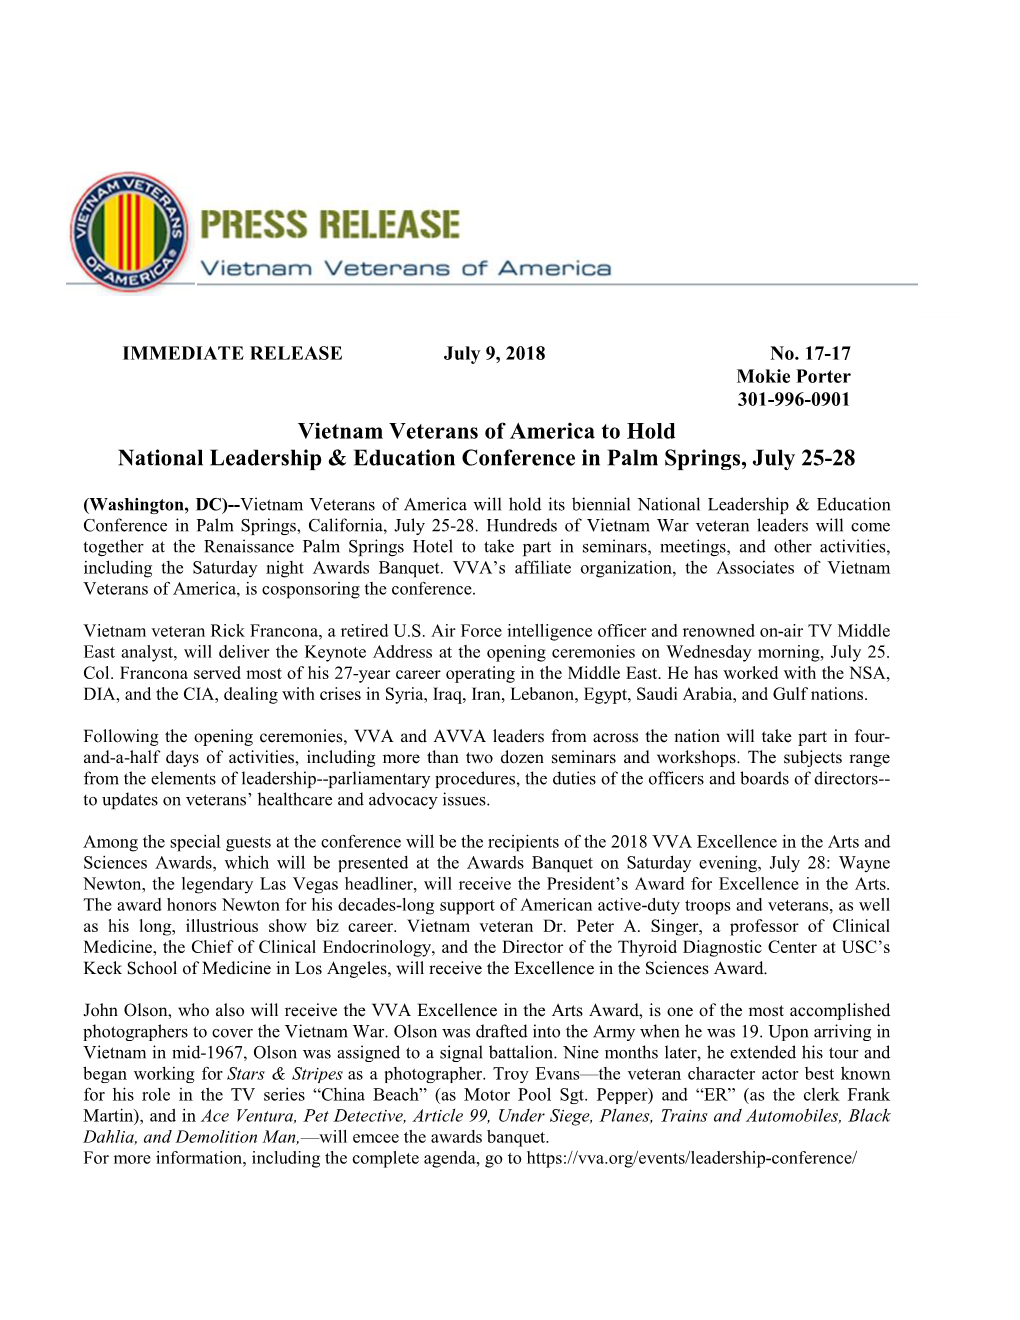 Vietnam Veterans of America to Hold National Leadership & Education Conference in Palm Springs, July 25-28